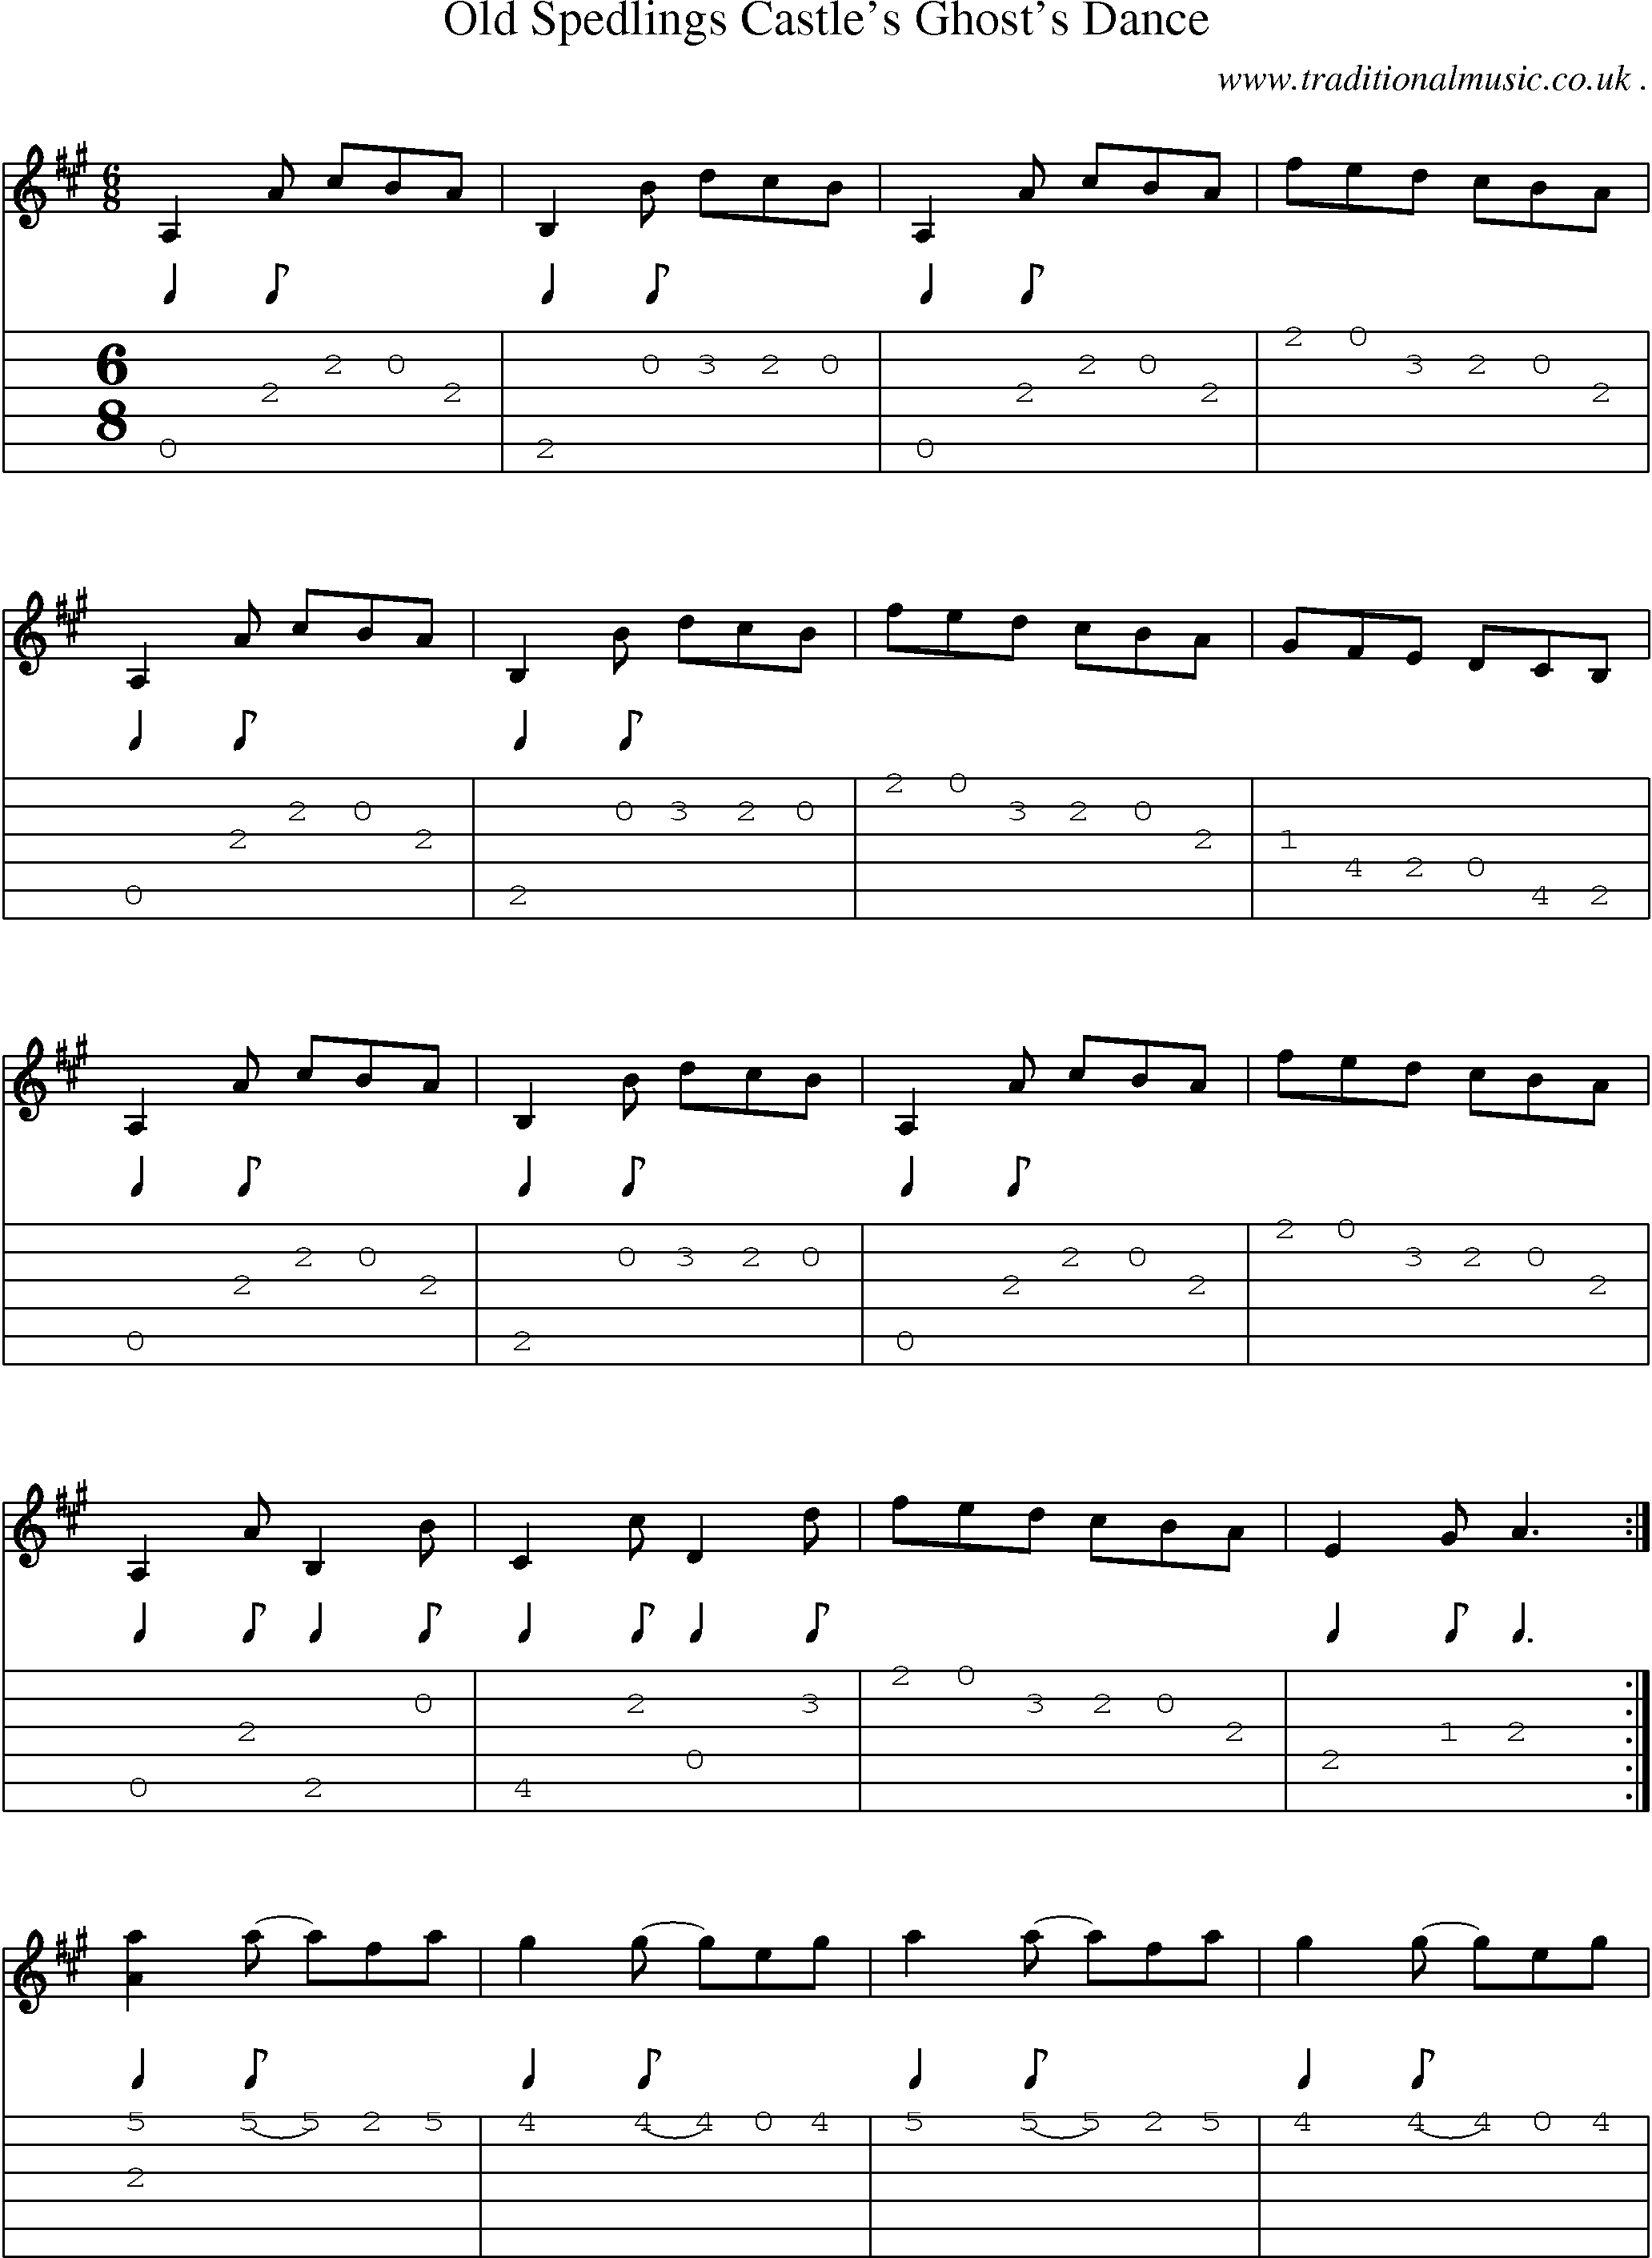 Sheet-Music and Guitar Tabs for Old Spedlings Castles Ghosts Dance